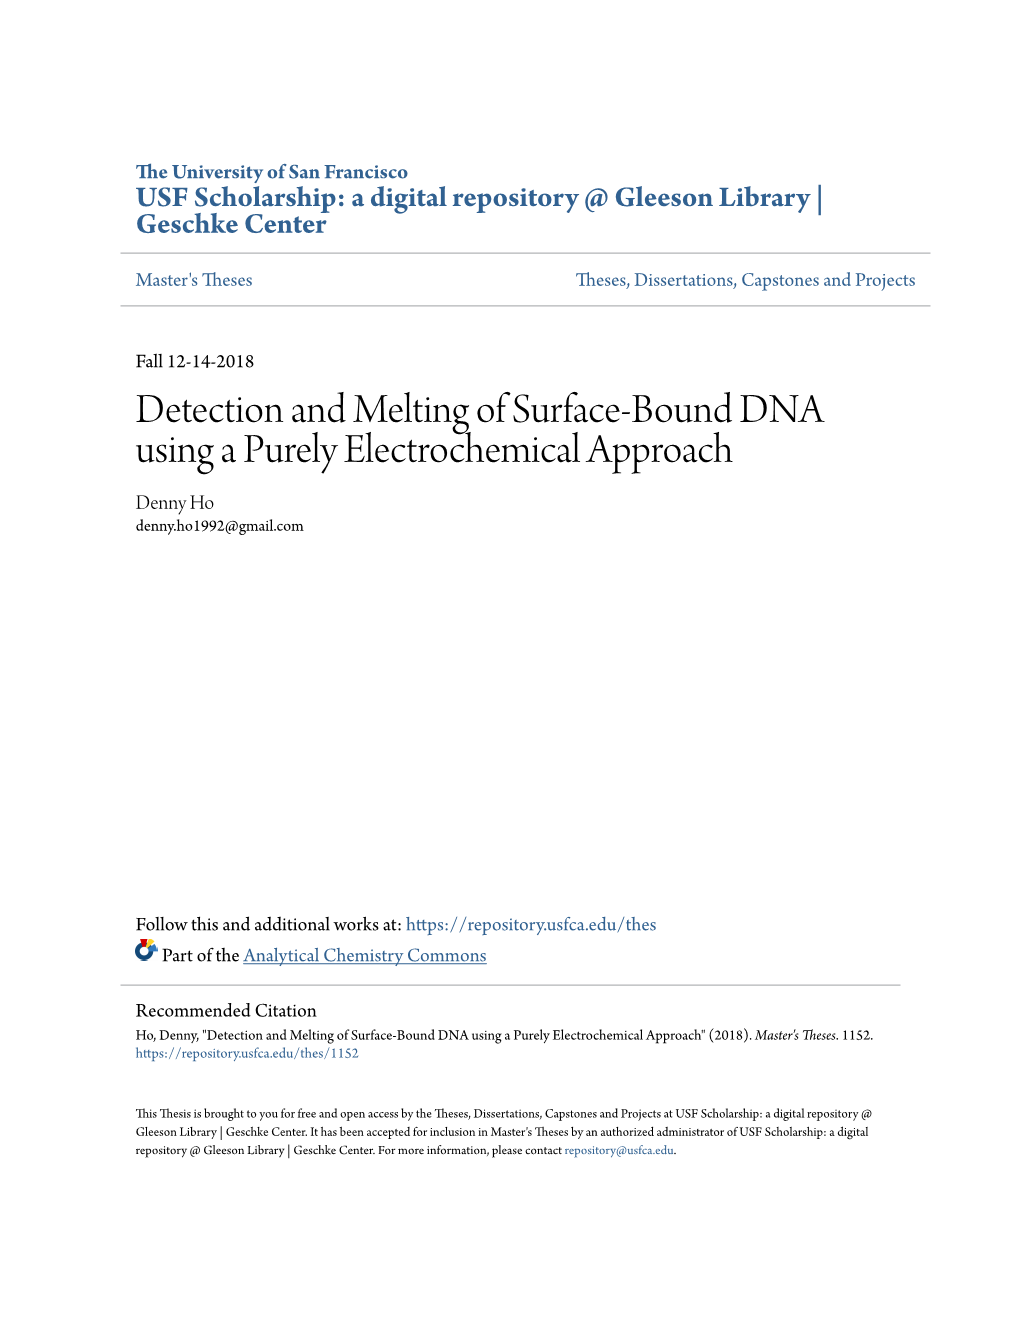 Detection and Melting of Surface-Bound DNA Using a Purely Electrochemical Approach Denny Ho Denny.Ho1992@Gmail.Com